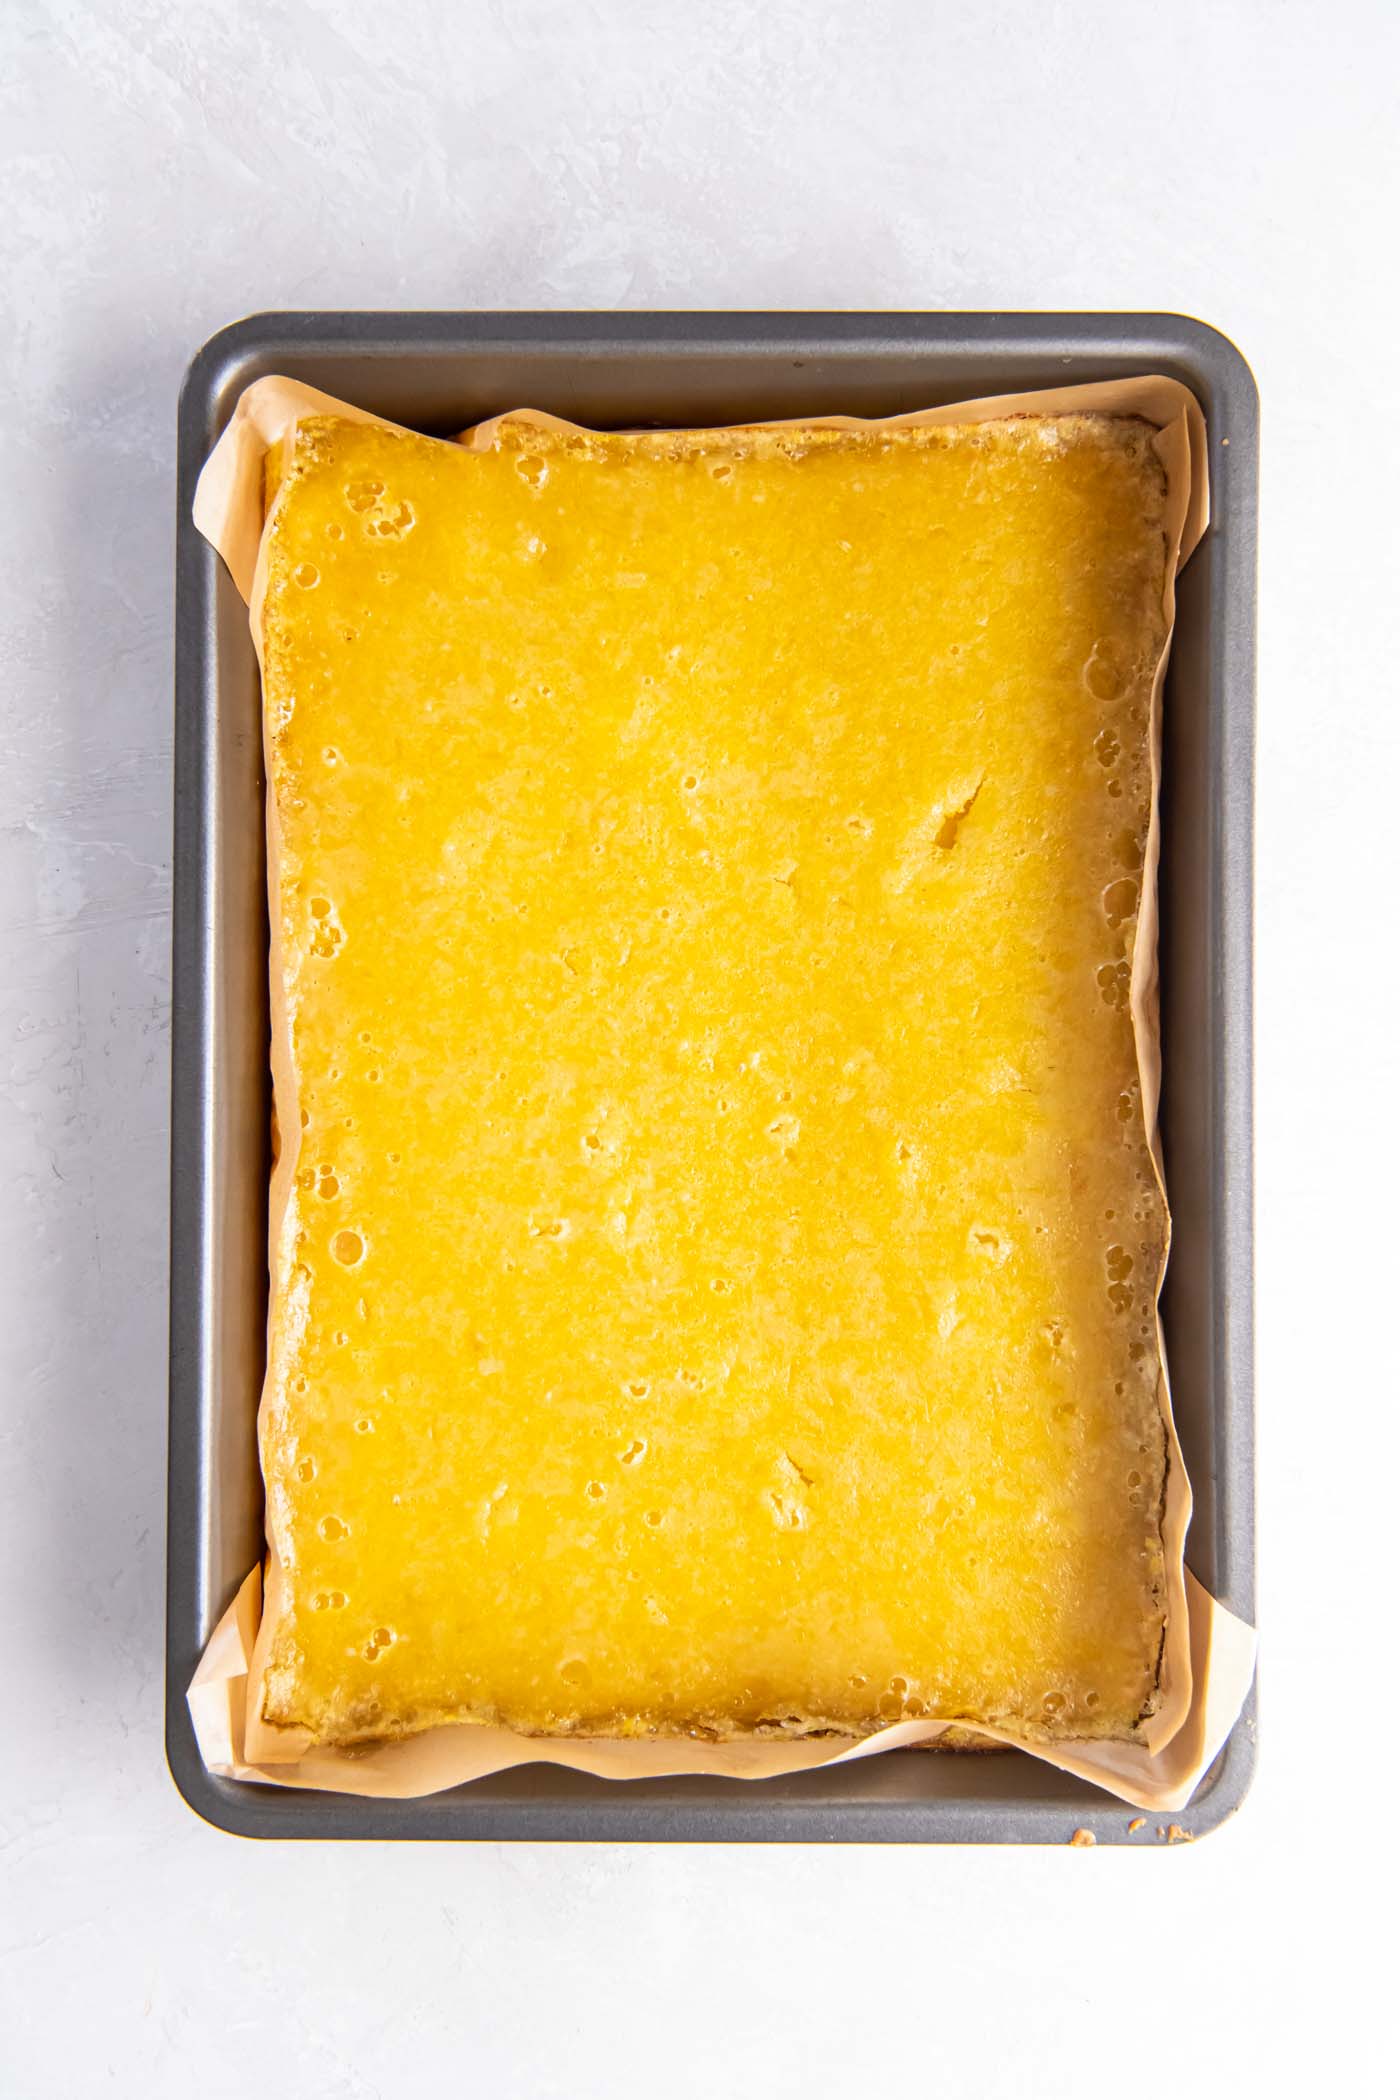 Baked lemon bars in parchment lined metal baking pan.